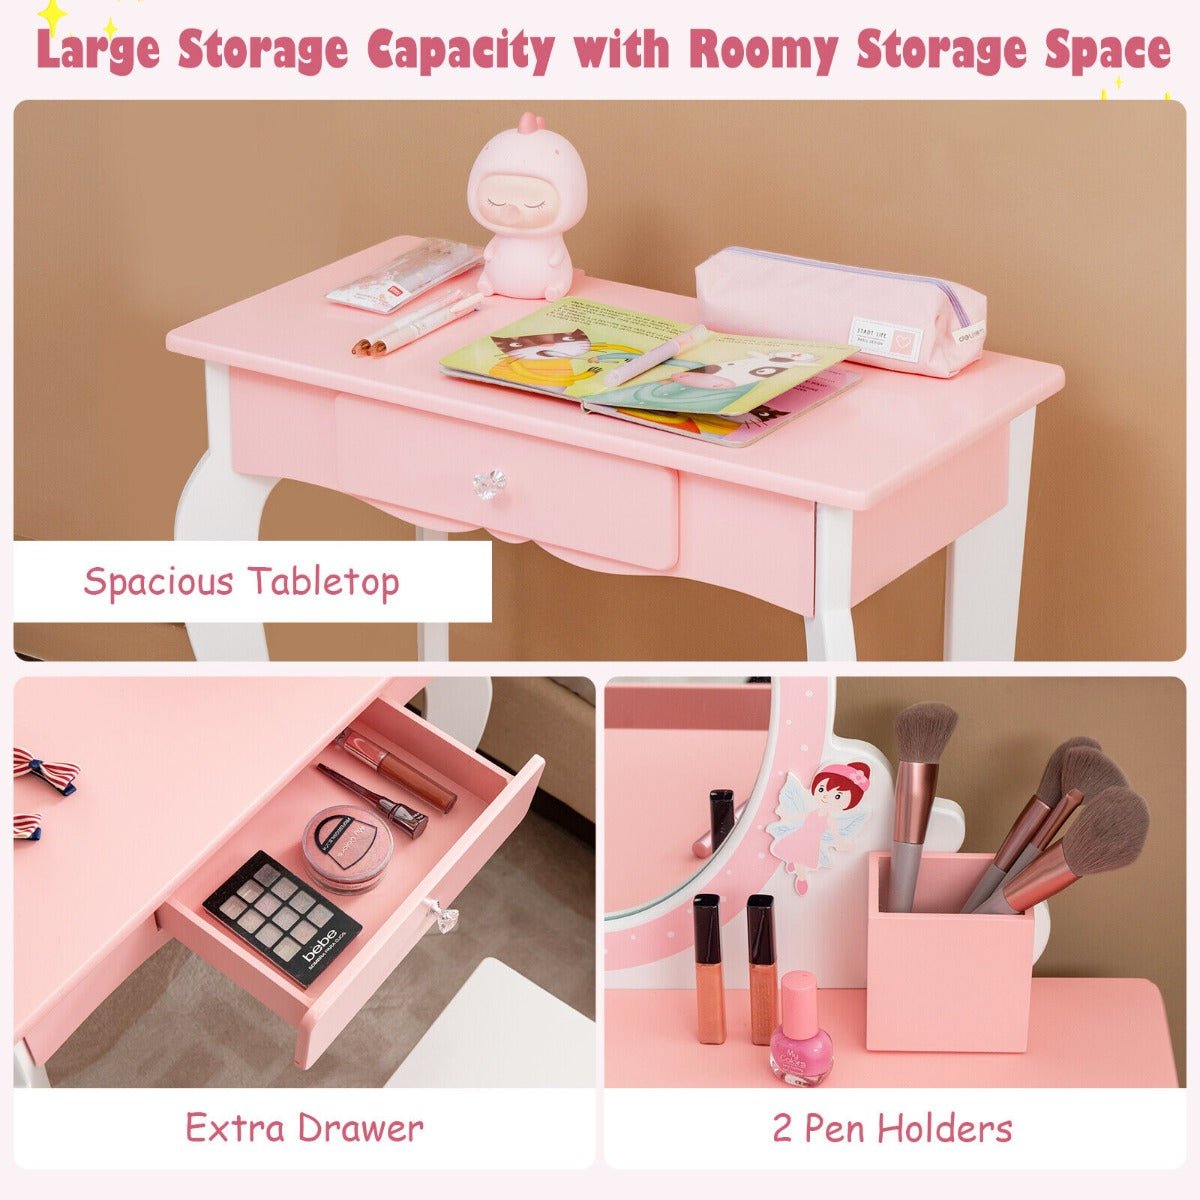 Dreamy Pink Vanity with Ample Storage for Treasures